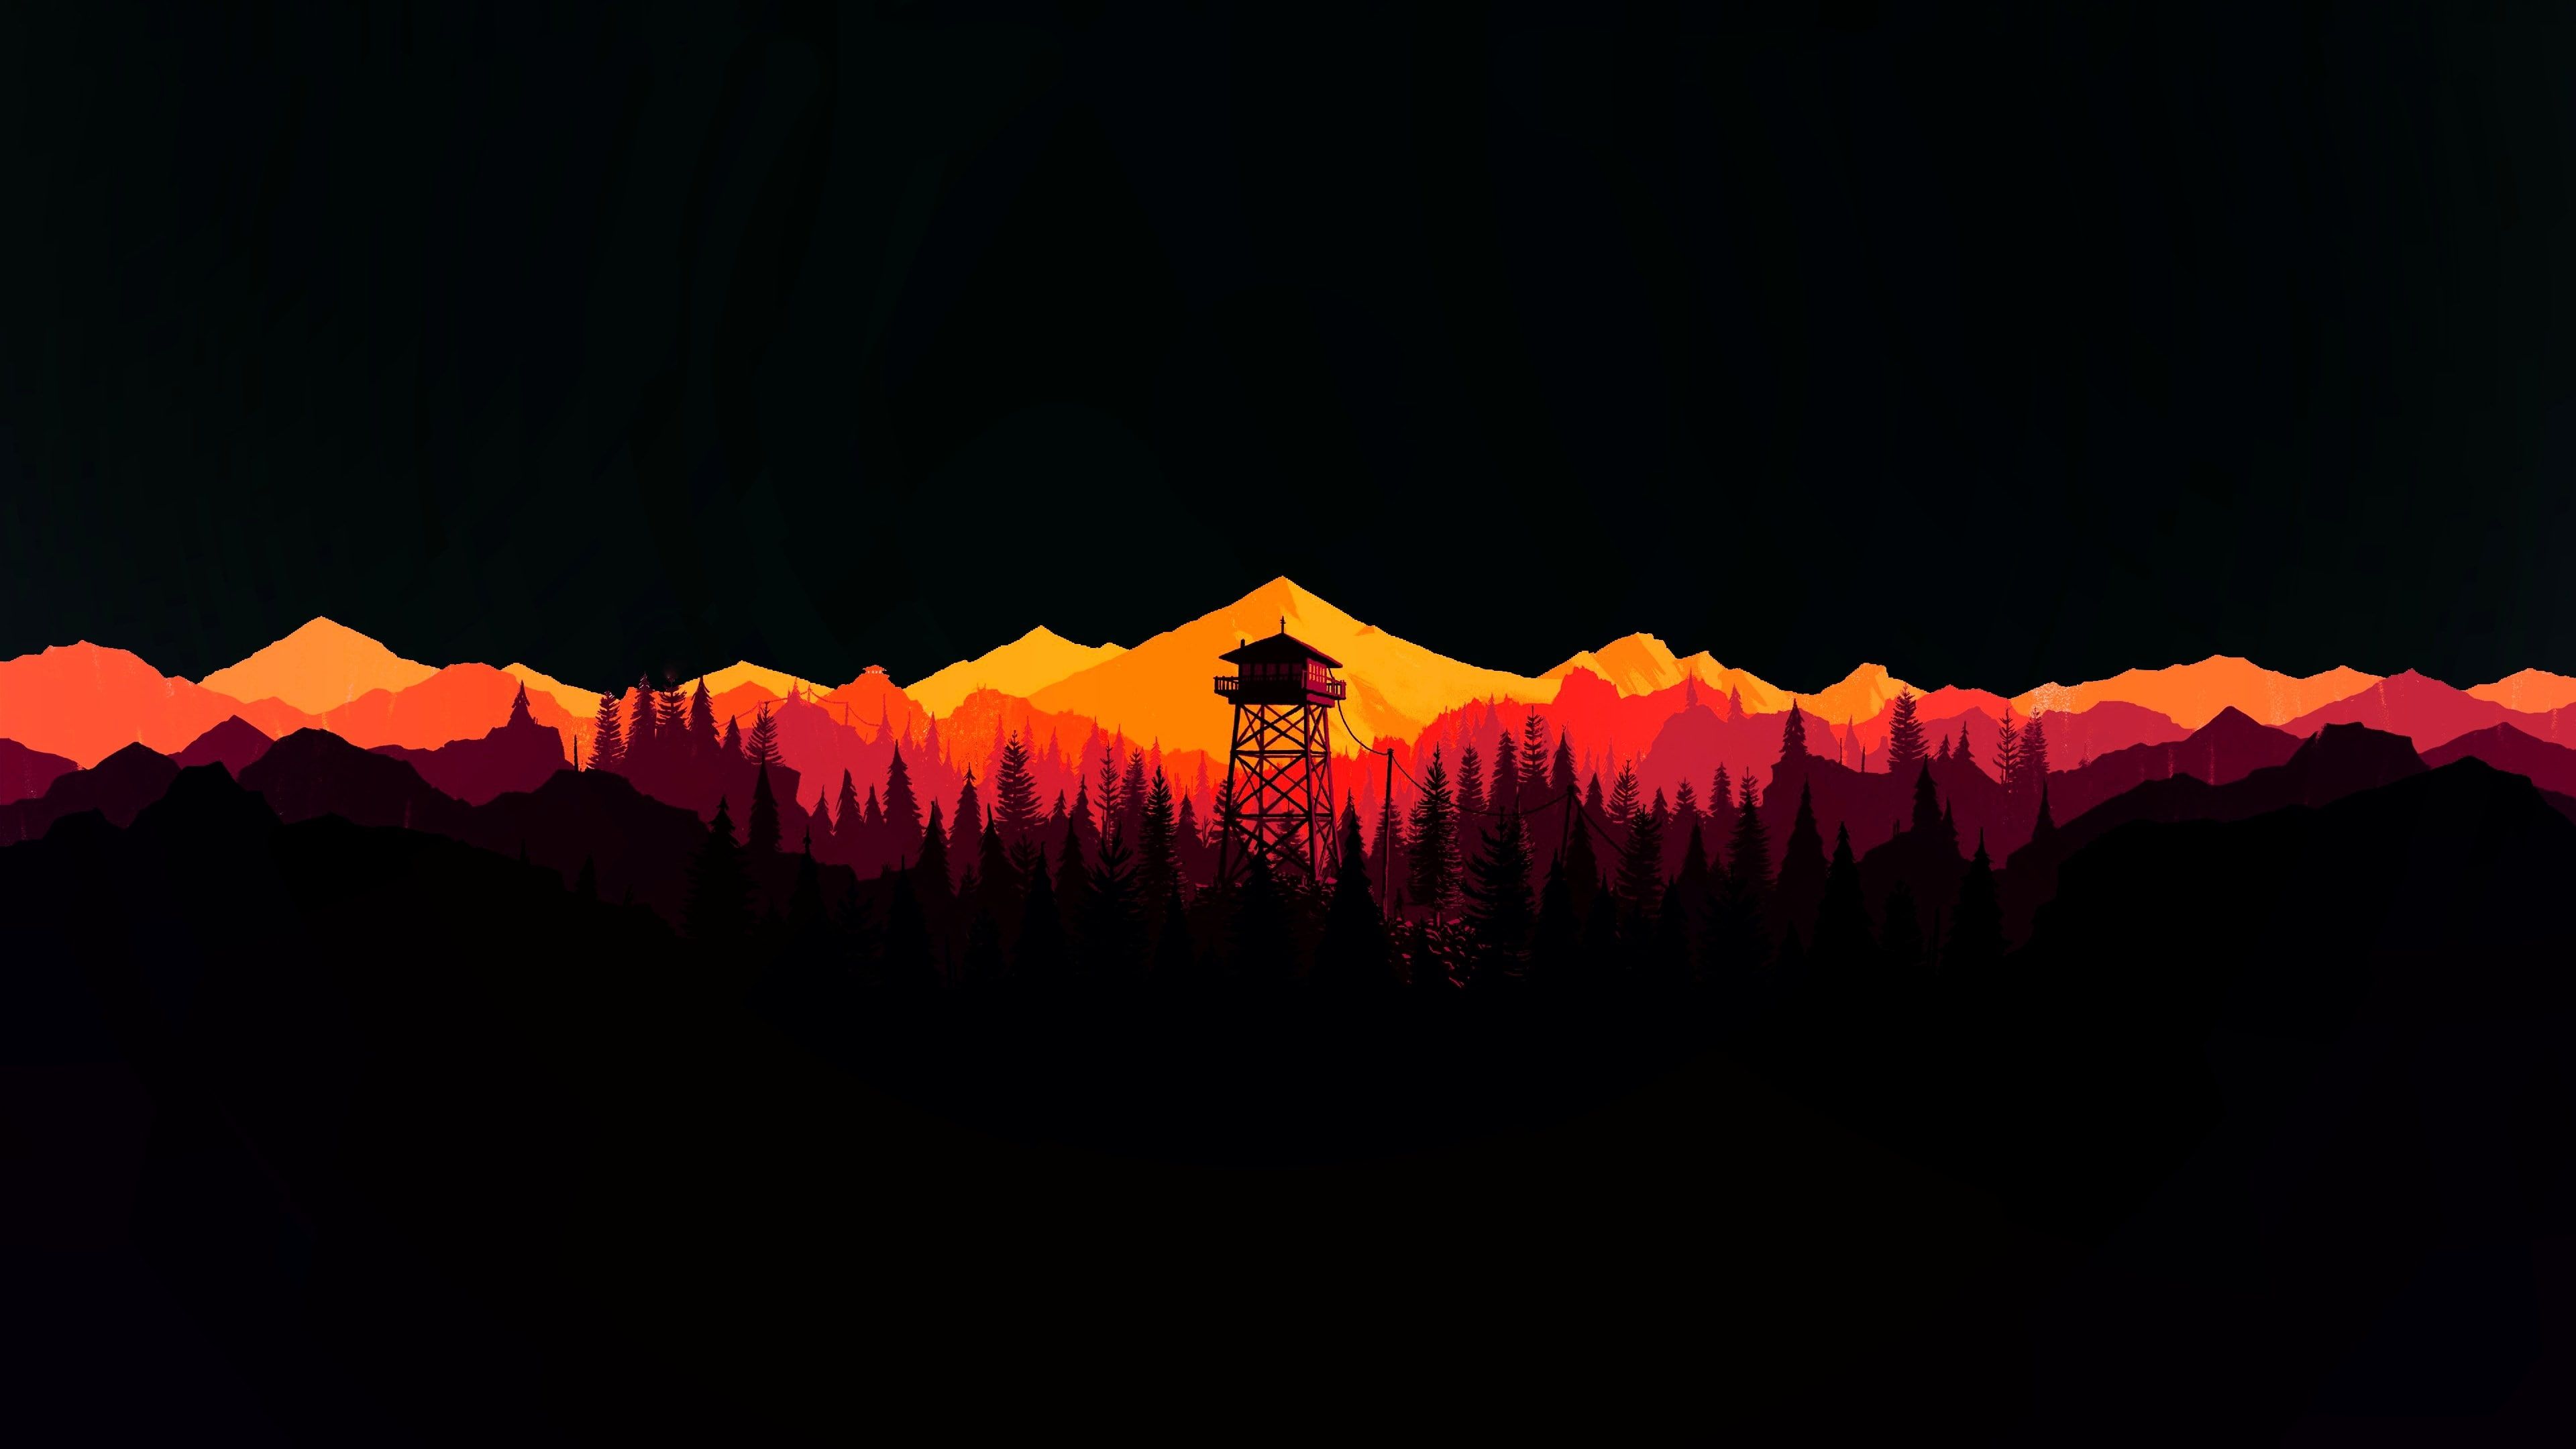 Watchtower in OLED style K #wallpaper #hdwallpaper #desktop. Computer wallpaper desktop wallpaper, iPhone homescreen wallpaper, Dual screen wallpaper